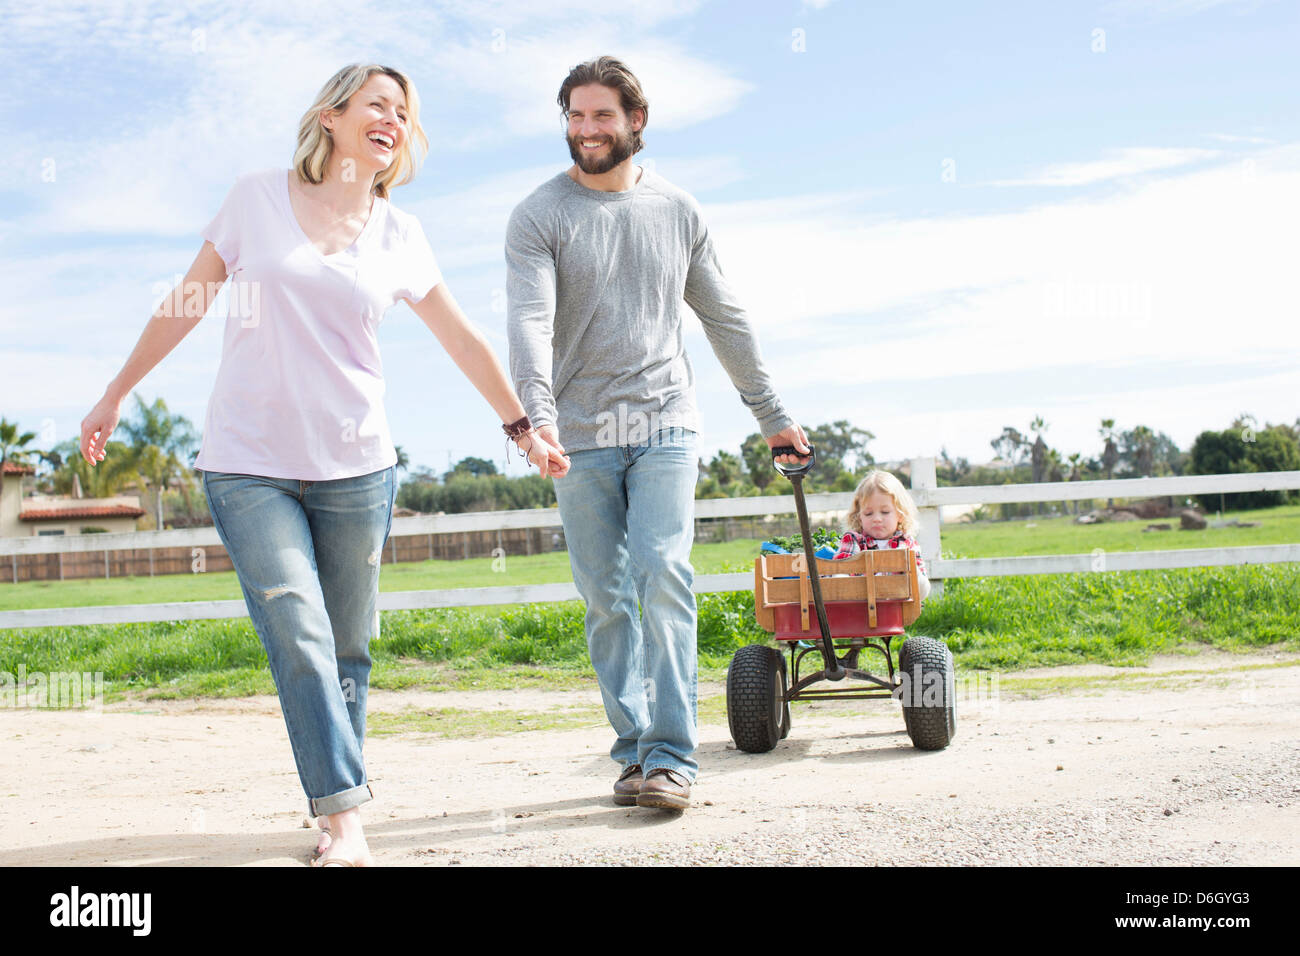 Parents pulling son in wagon Stock Photo